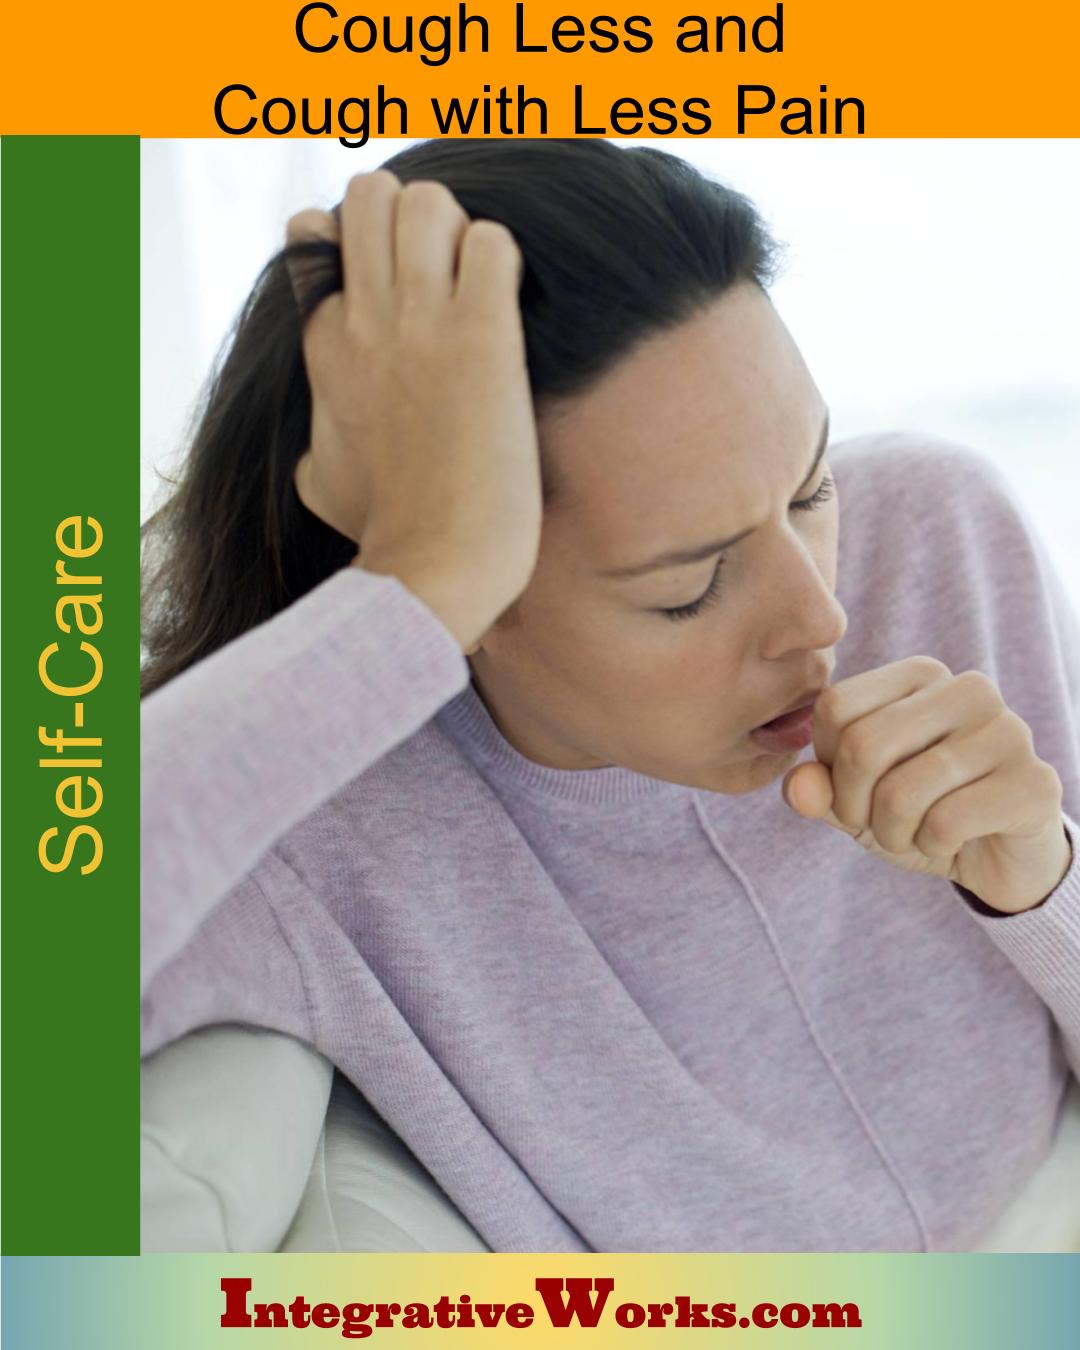 Self Care – Cough less and cough with less pain